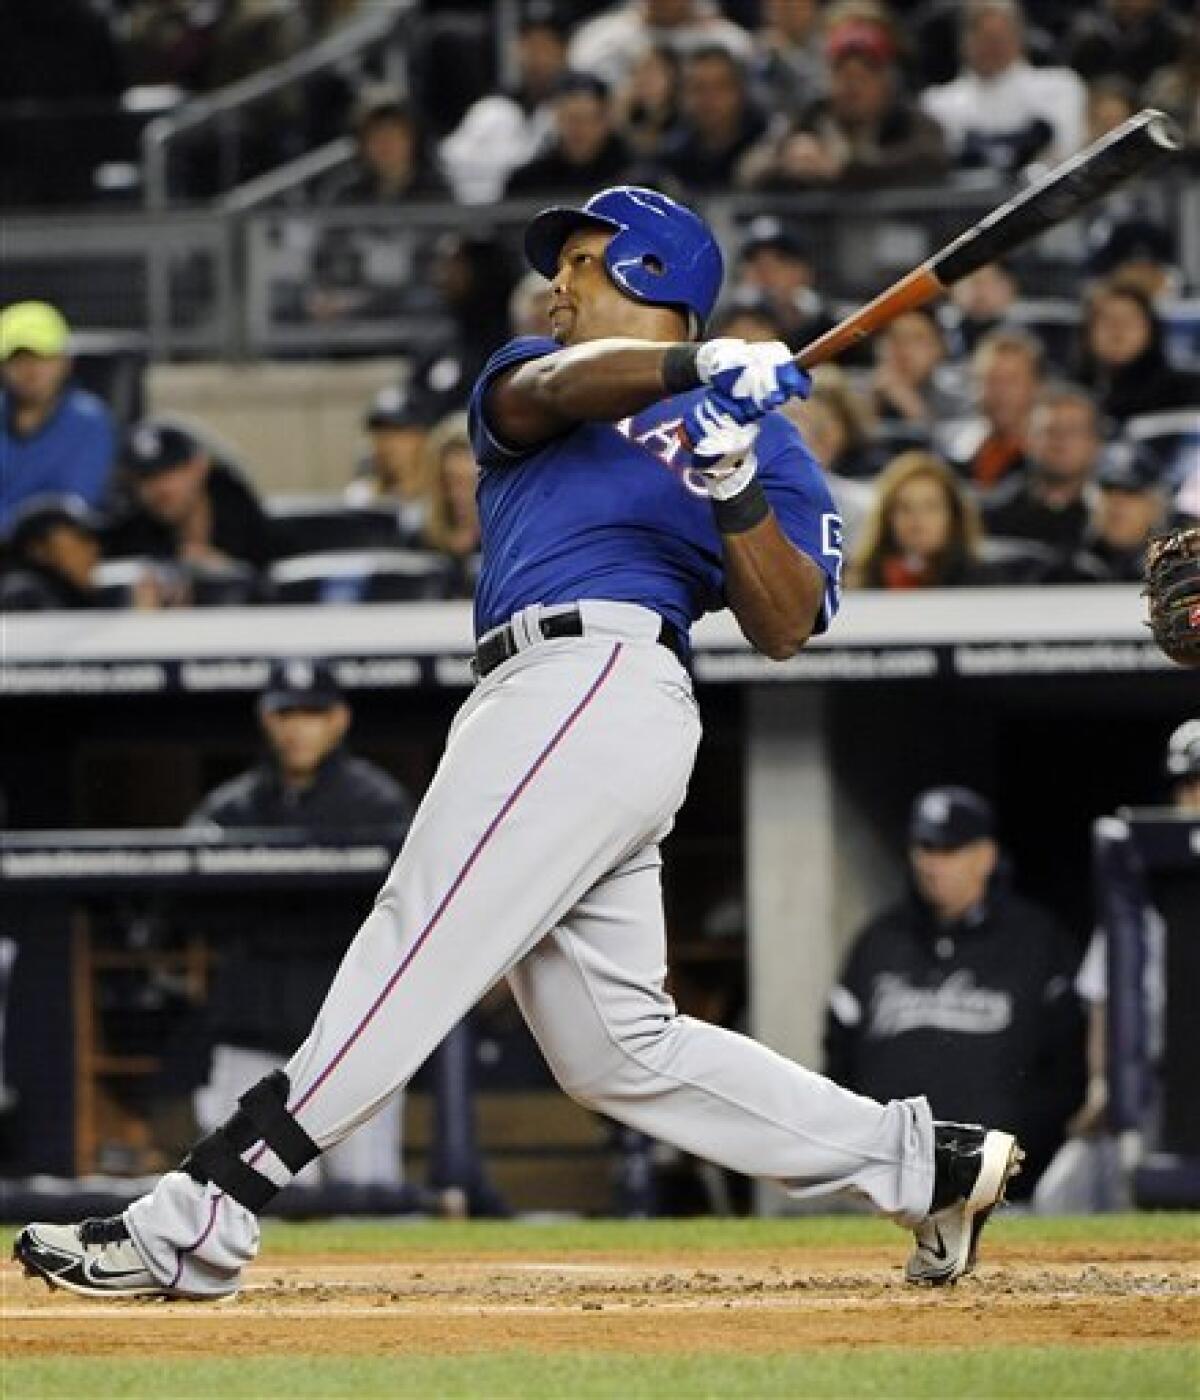 Game 5: Beltre homers in 6th, score tied 2-all - The San Diego Union-Tribune